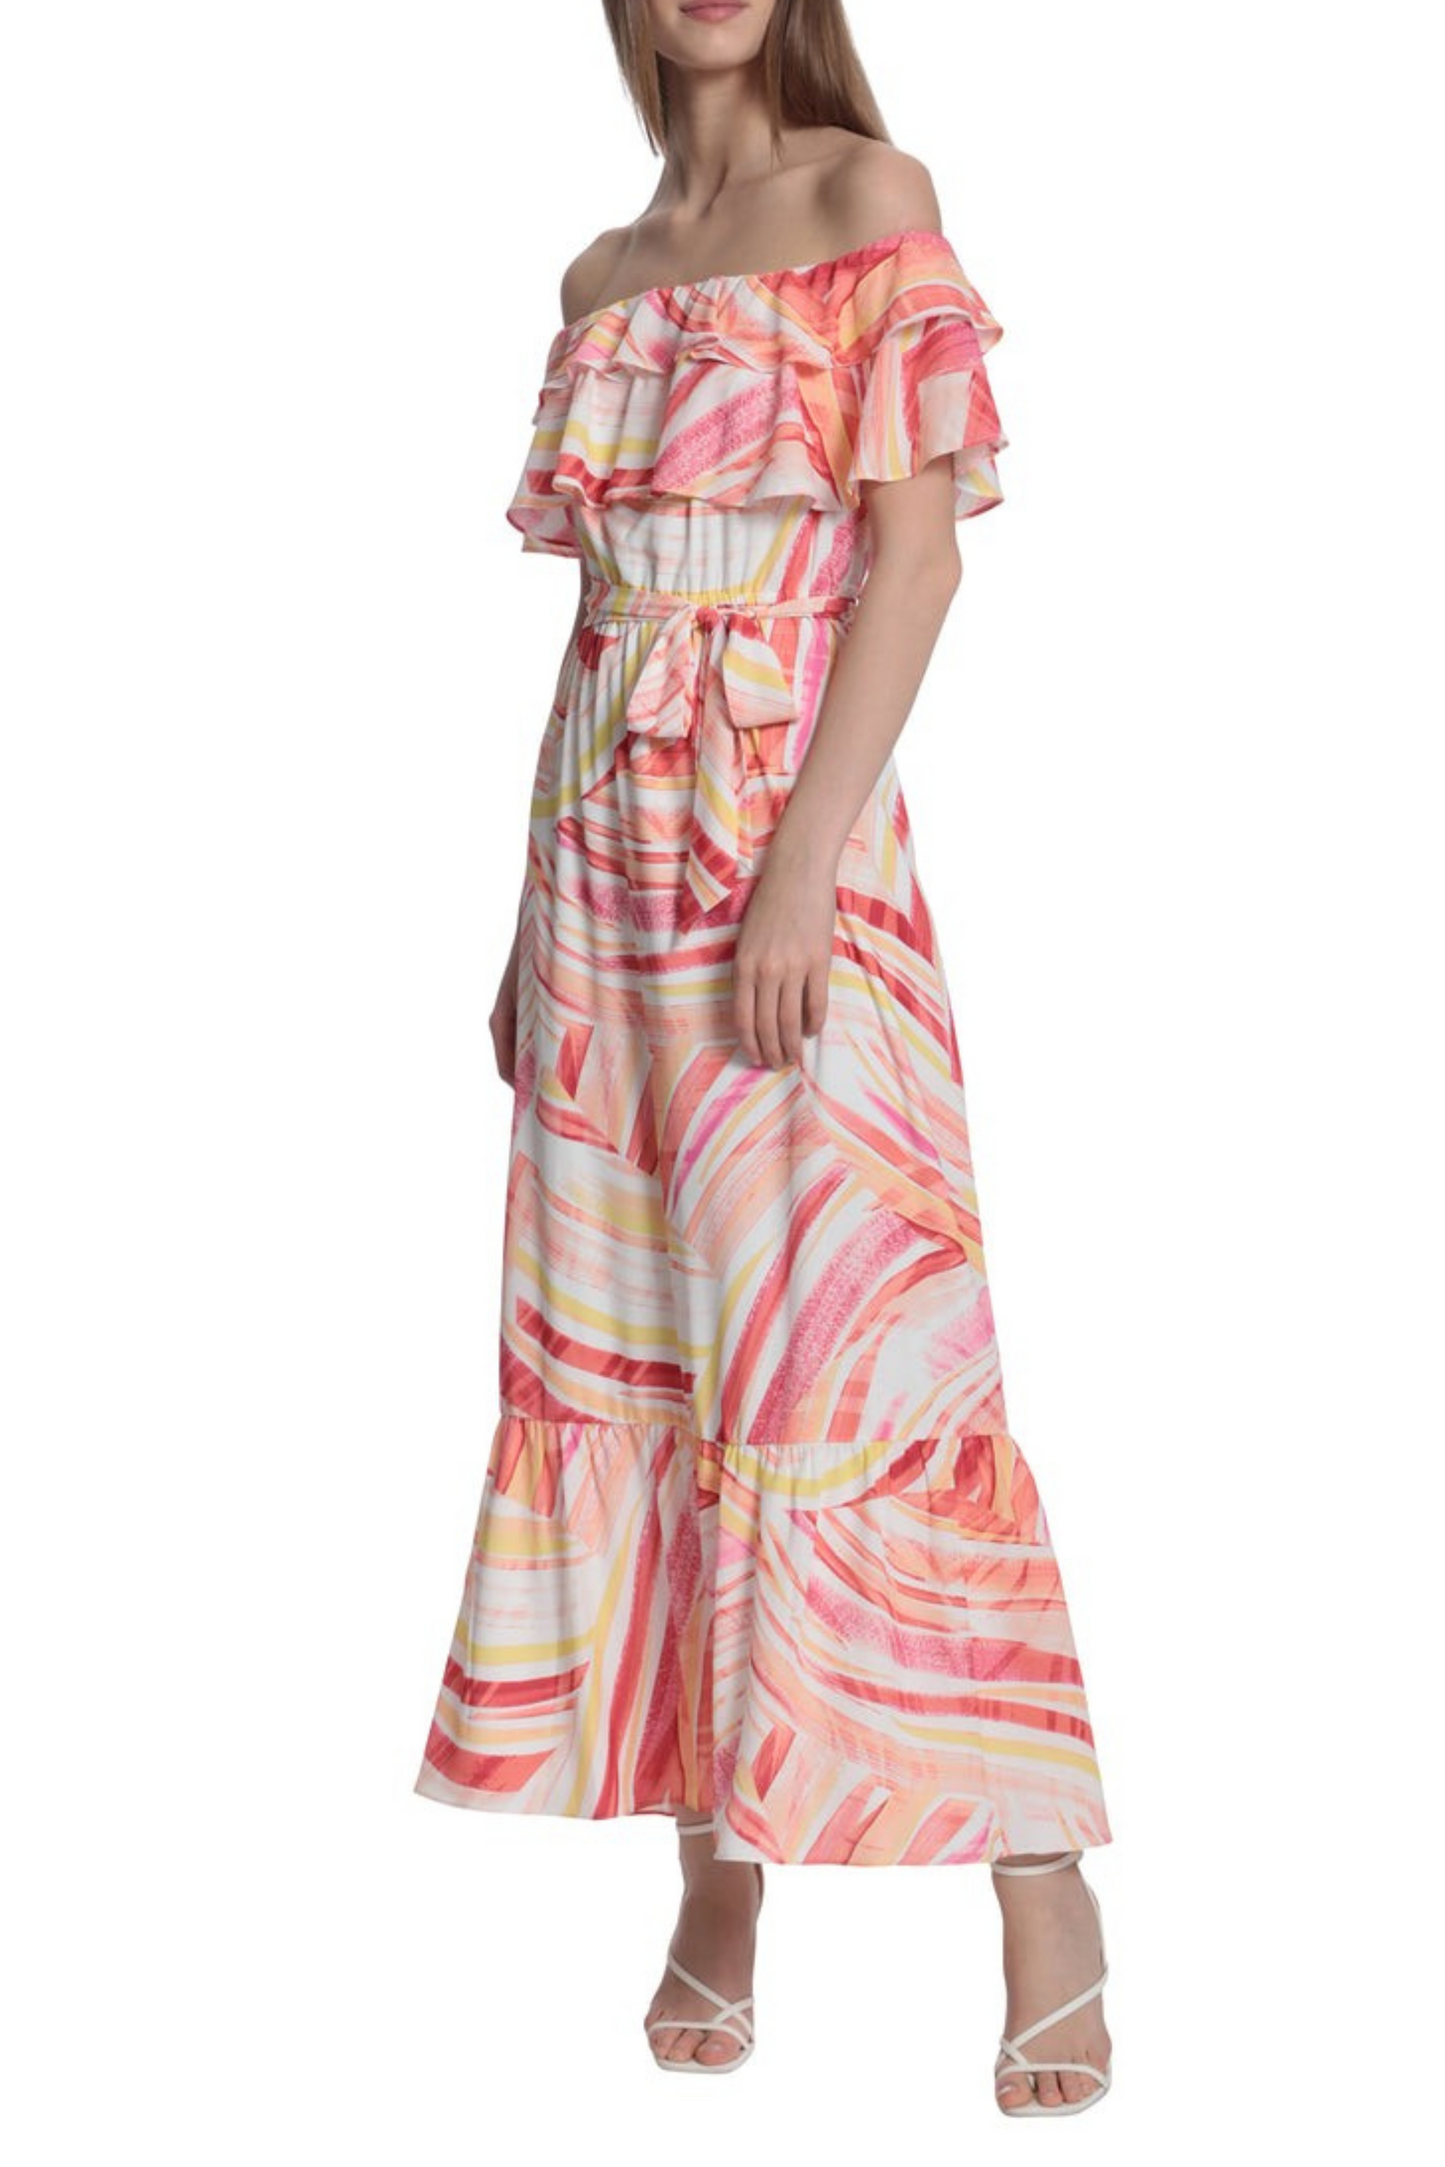 Donna Morgan Coral Swirl Print Ruffle Off The Shoulder Tiered Maxi Dress